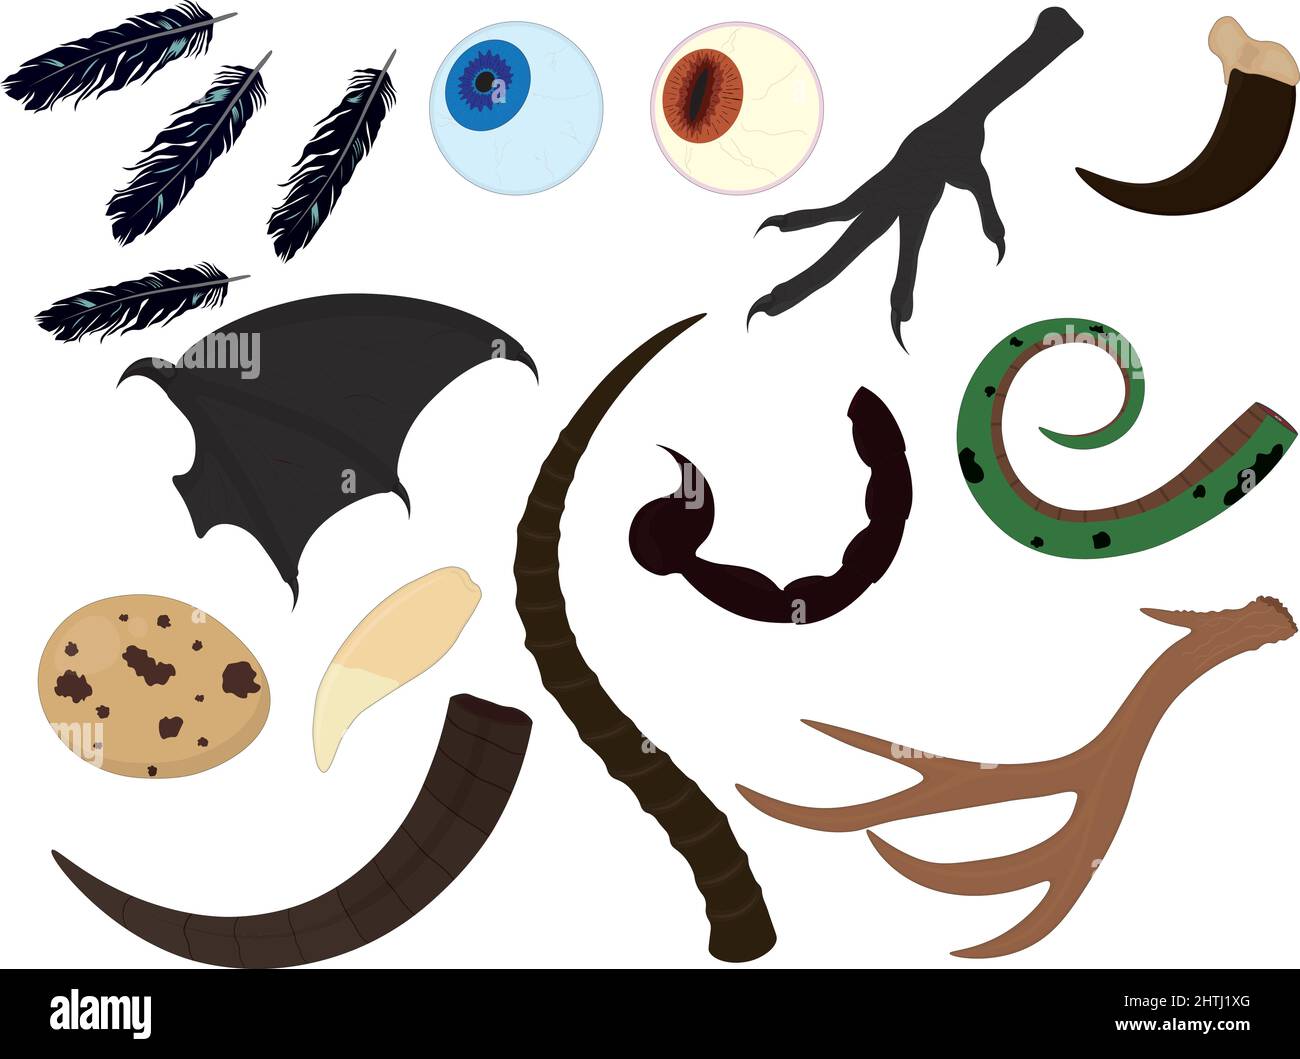 Alchemy witchcraft animal ingredients collection vector illustration Stock Vector